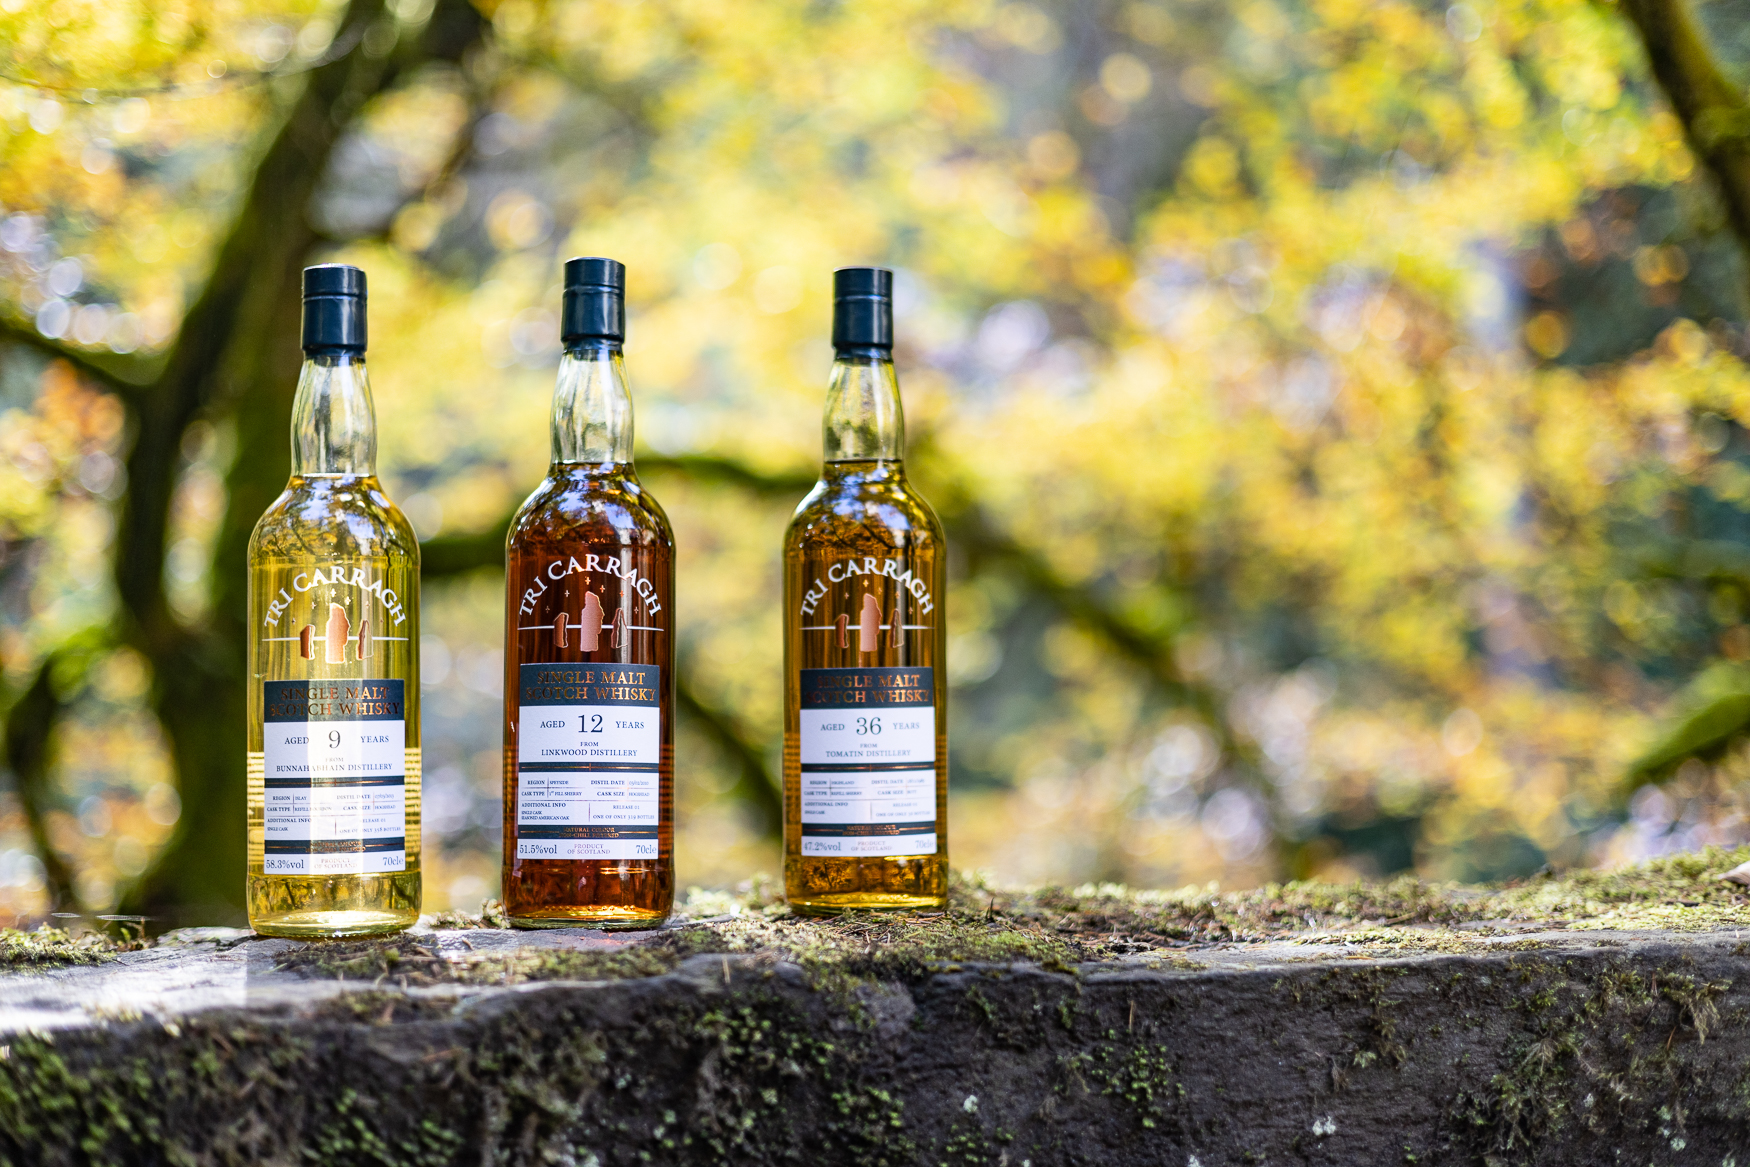 Luxury whisky brand calls out for applications for the BEST job in the world